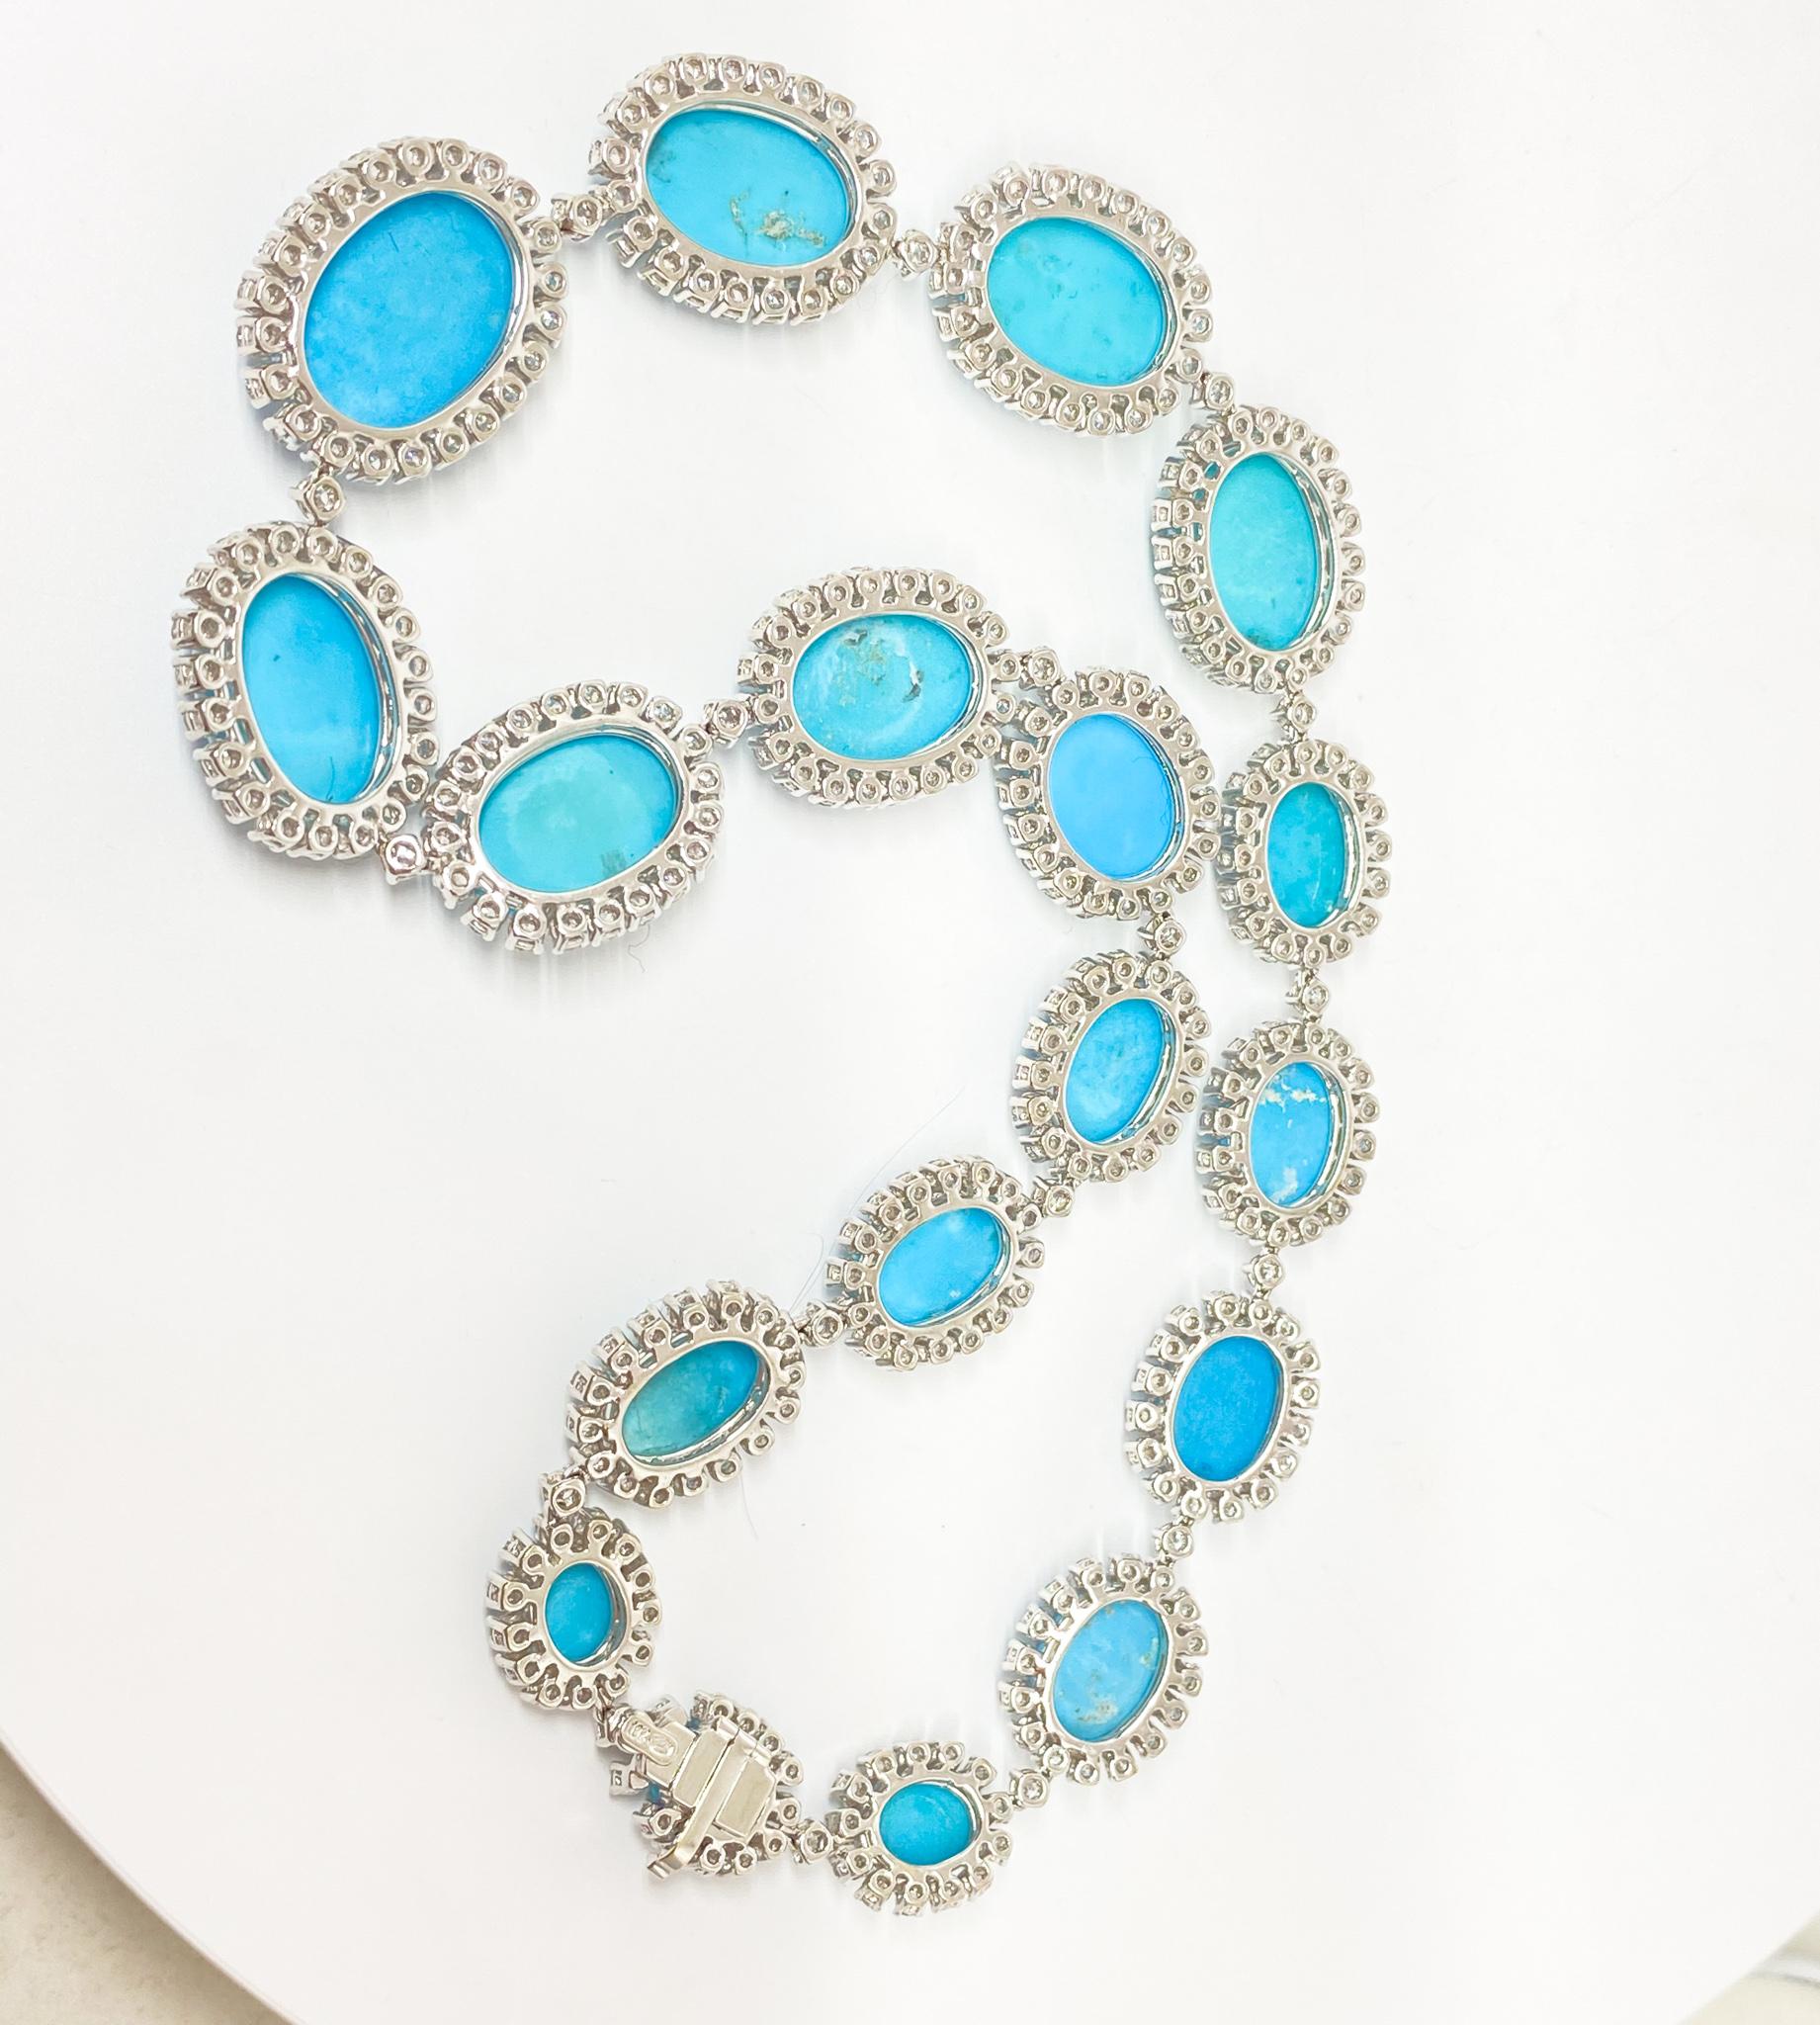 Spectacular beaded necklace in 18KT white gold featuring oval cut prong set vibrant turquoise stones weighing approximately 117.60 carats total each surrounded by a beautiful halo of prong set round cut white diamonds to accentuate the sky blue